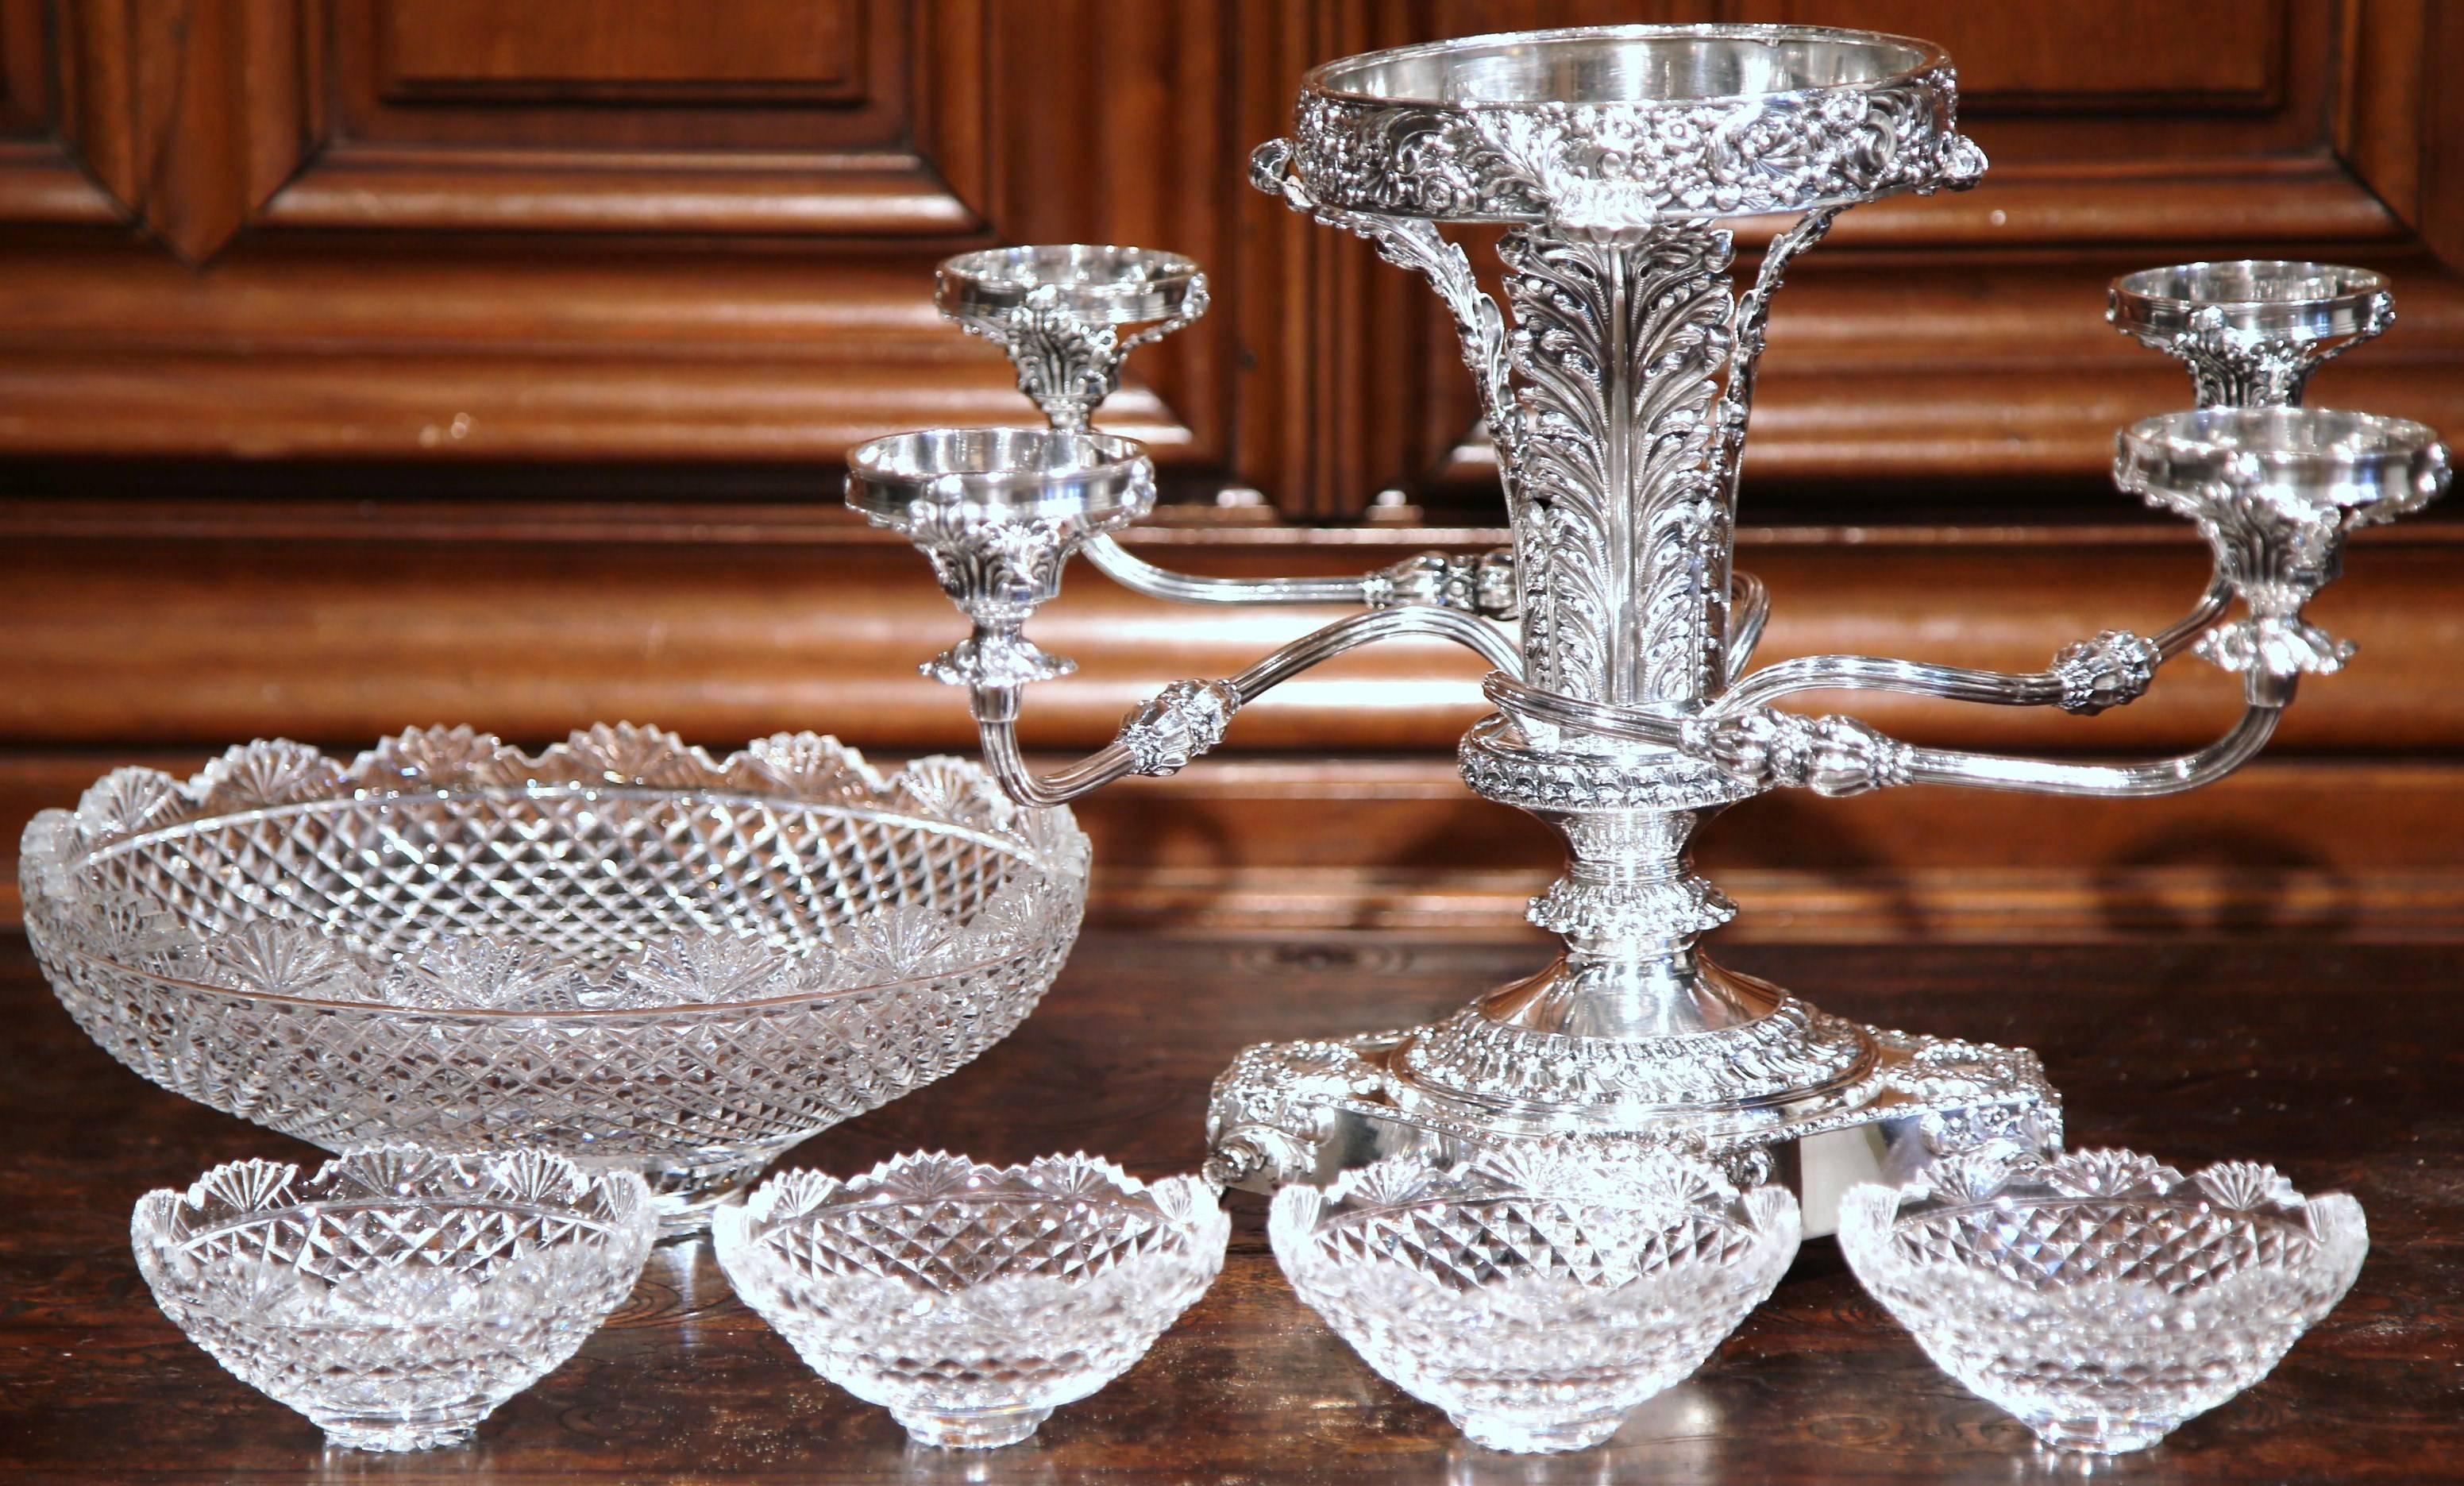 19th Century English Silver Plated Epergne Centrepiece with Five Cut-Glass Bowls 2